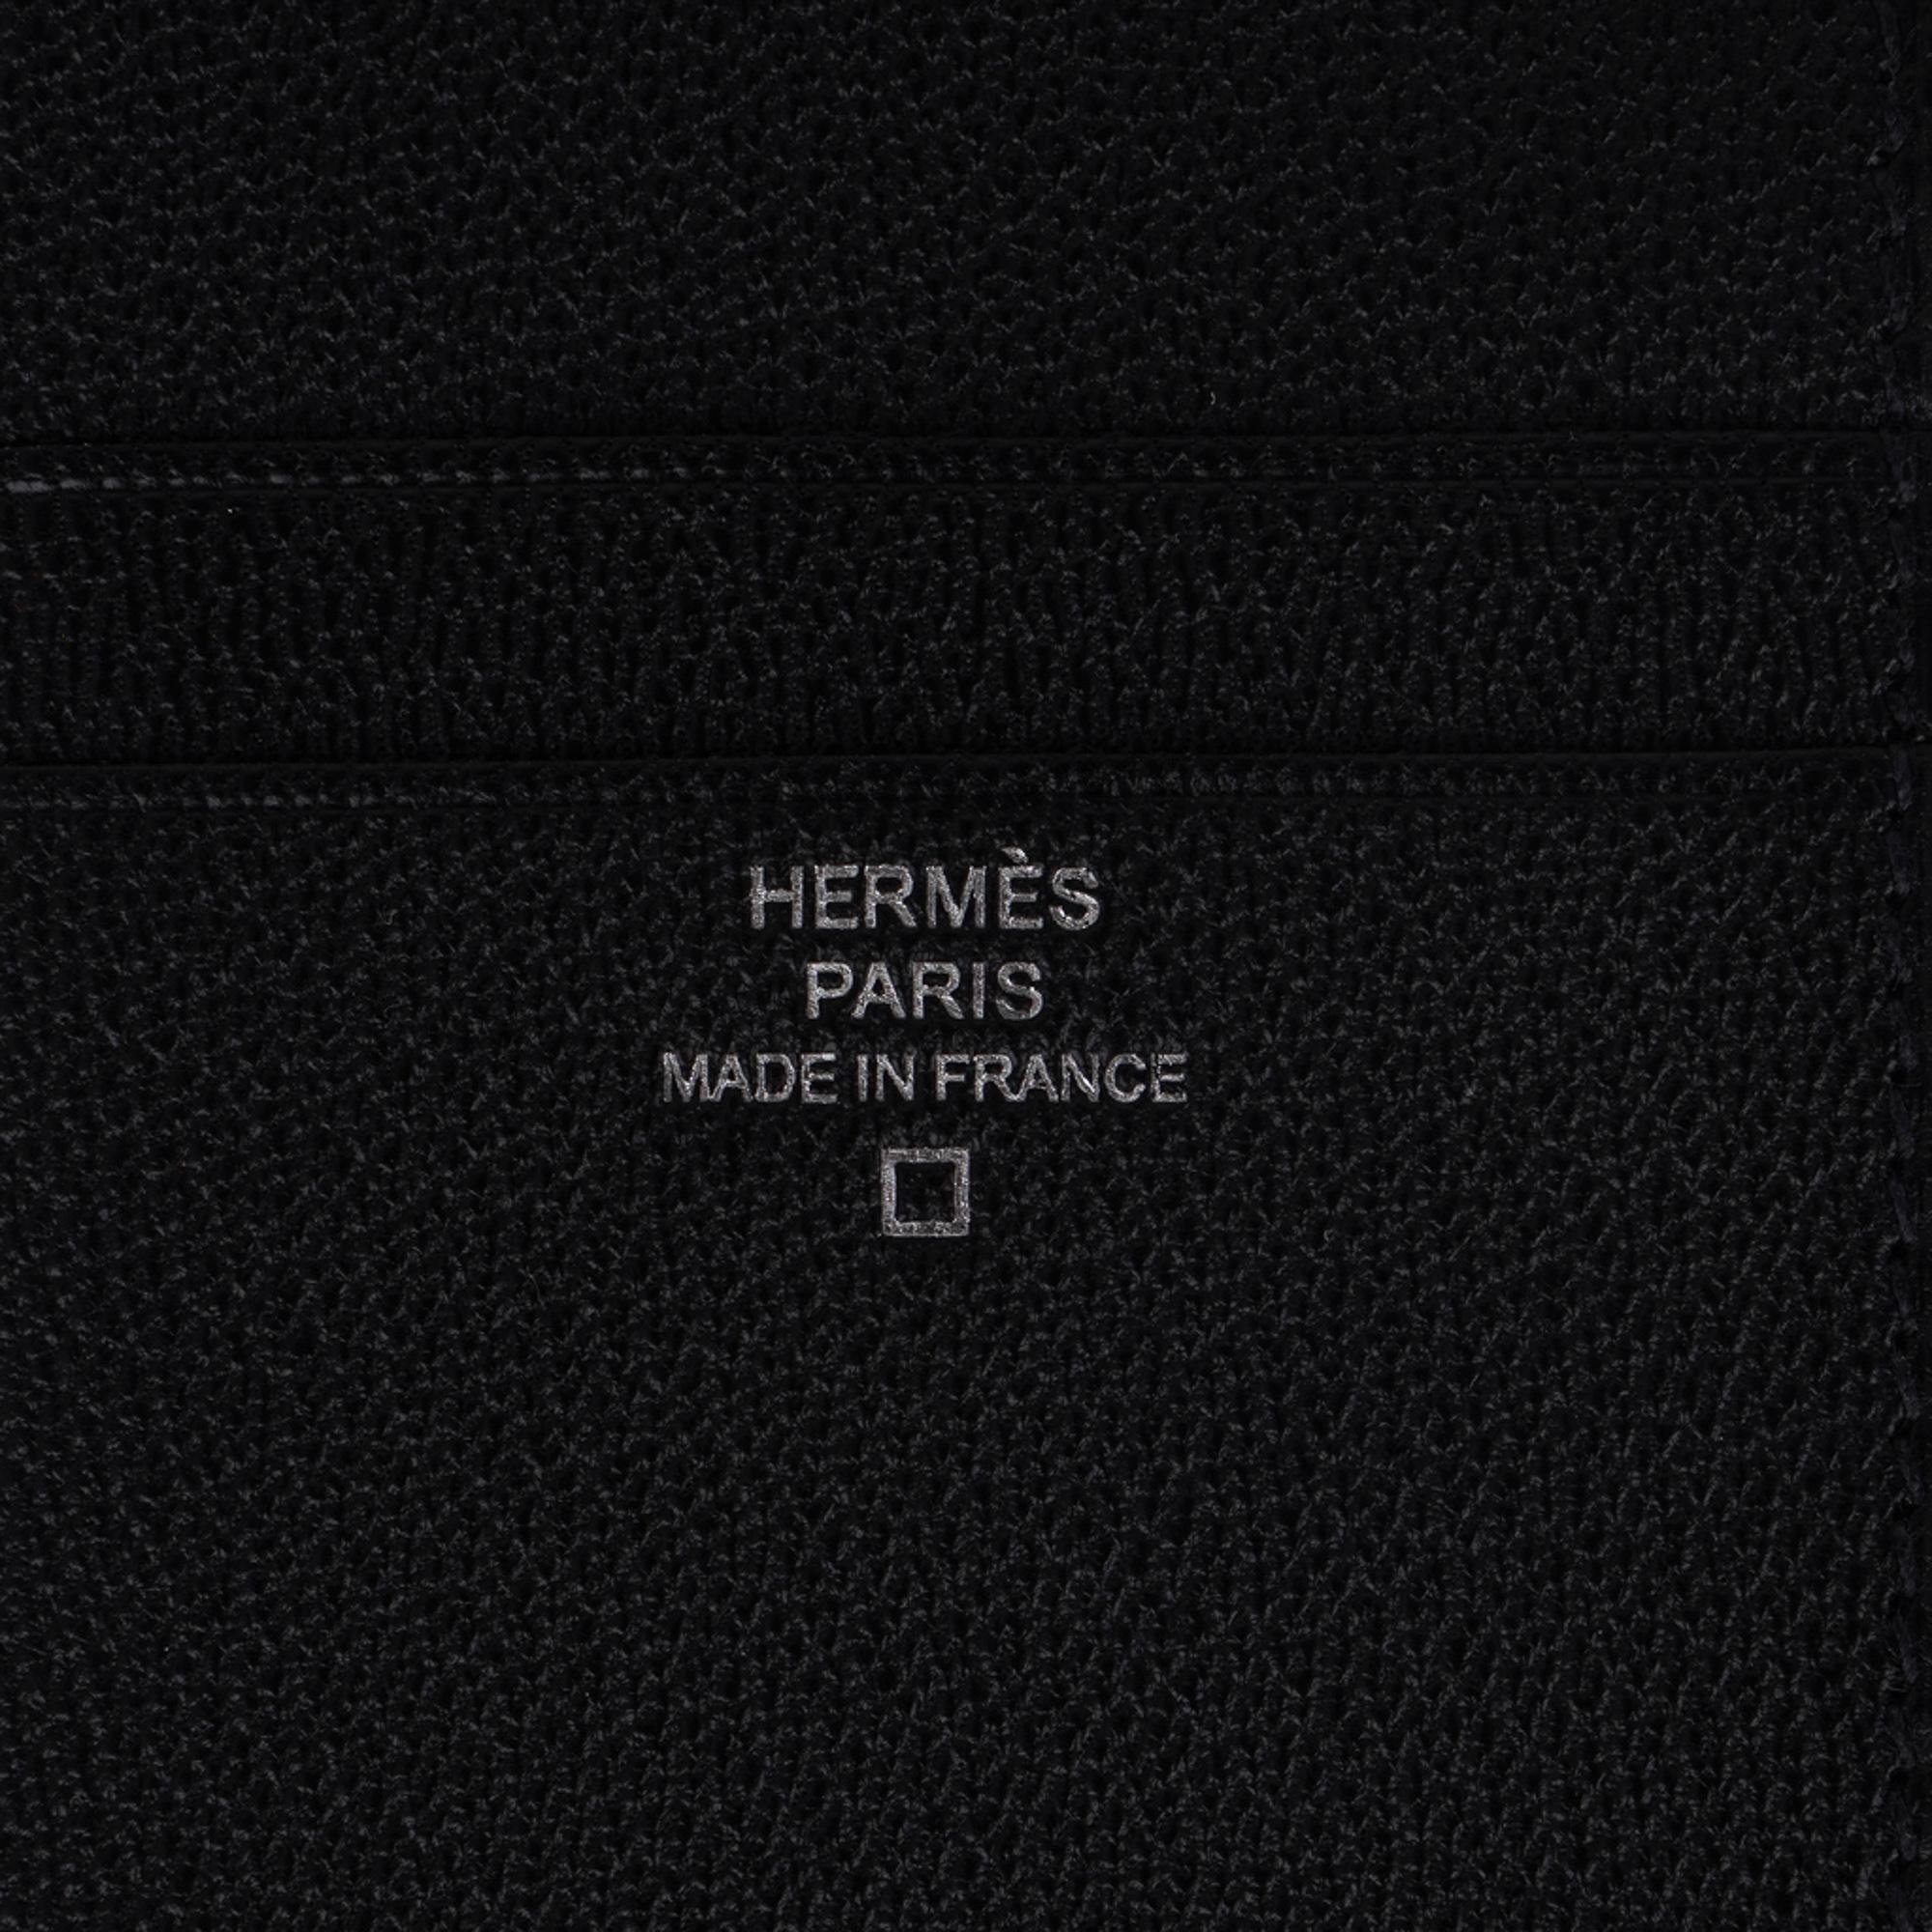 Mightychic offers a guaranteed authentic Hermes MC2 Euclid Card Case featured in Black Matte Alligator.
The card holder has 4 slots for business/credit cards and 2 pockets.
Comes with signature Hermes box.
New or Store Fresh Condition.
final